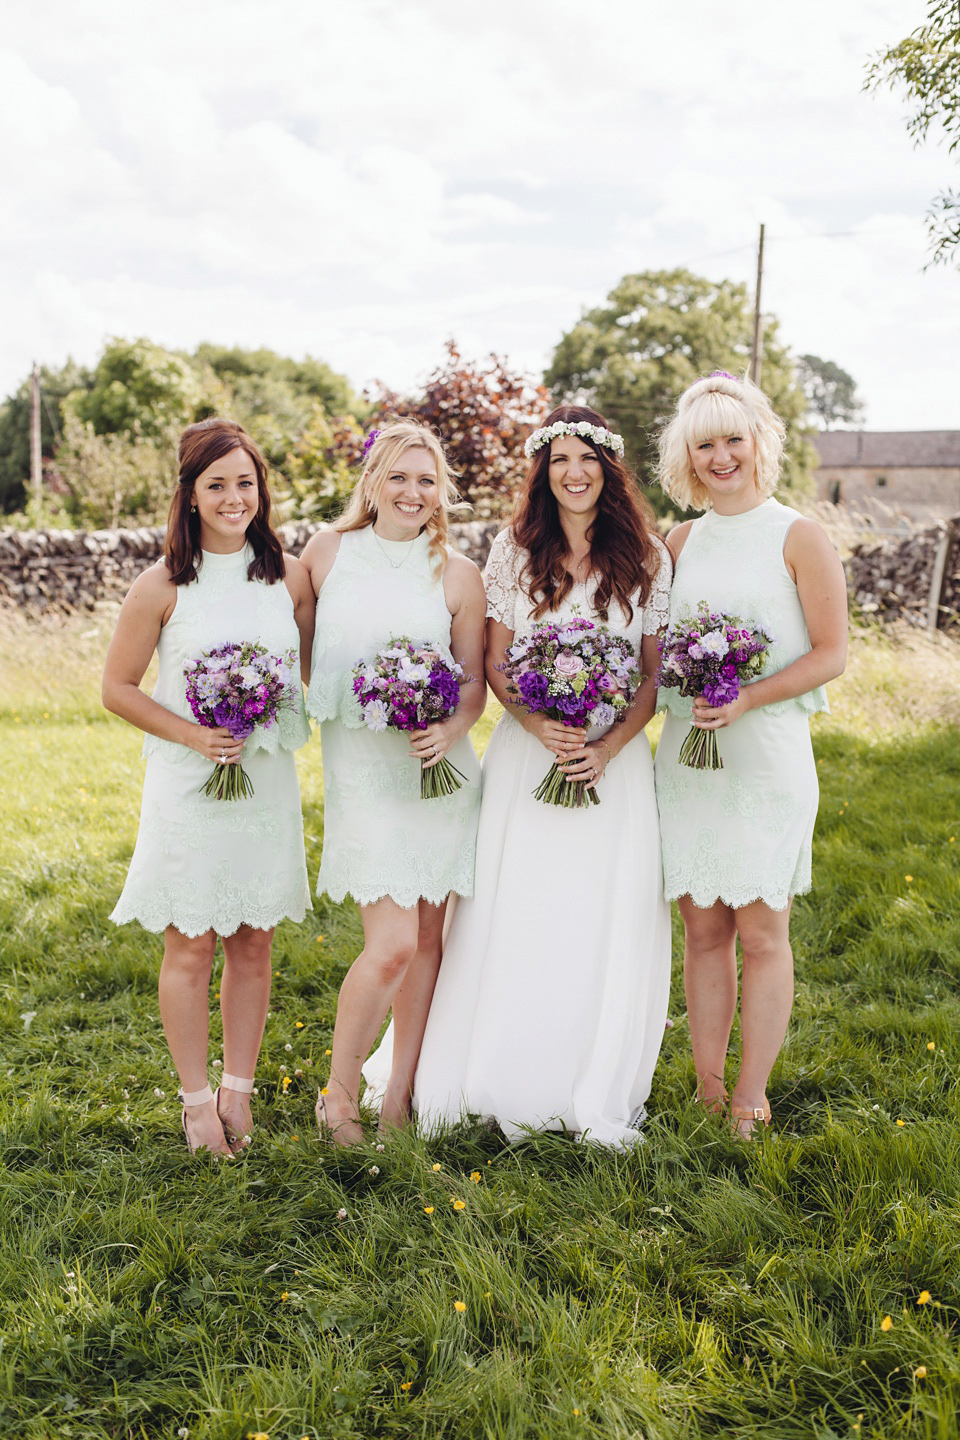 A 1970's Vintage Dress and a Floral Crown for a Book Inspired Farm Wedding. Photography by Lucy Little.